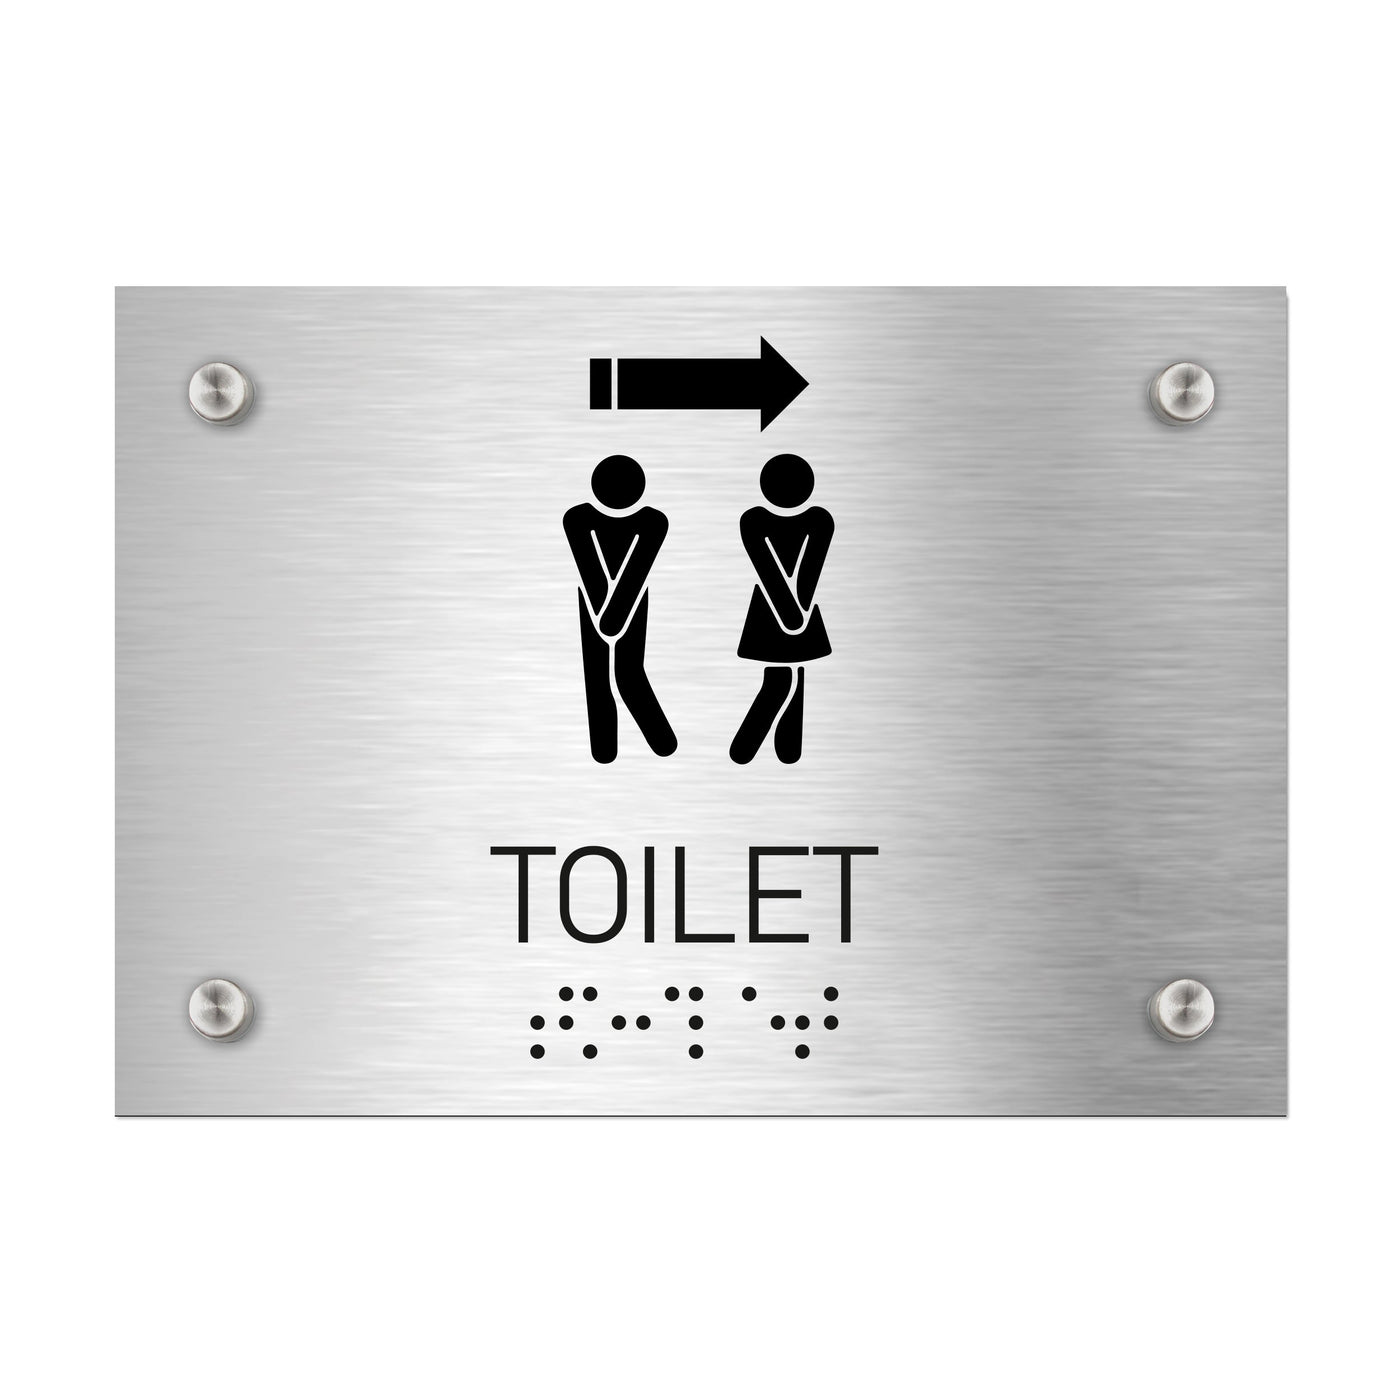 Bathroom Signs - Unisex Toilet Directional Sign - Stainless Steel